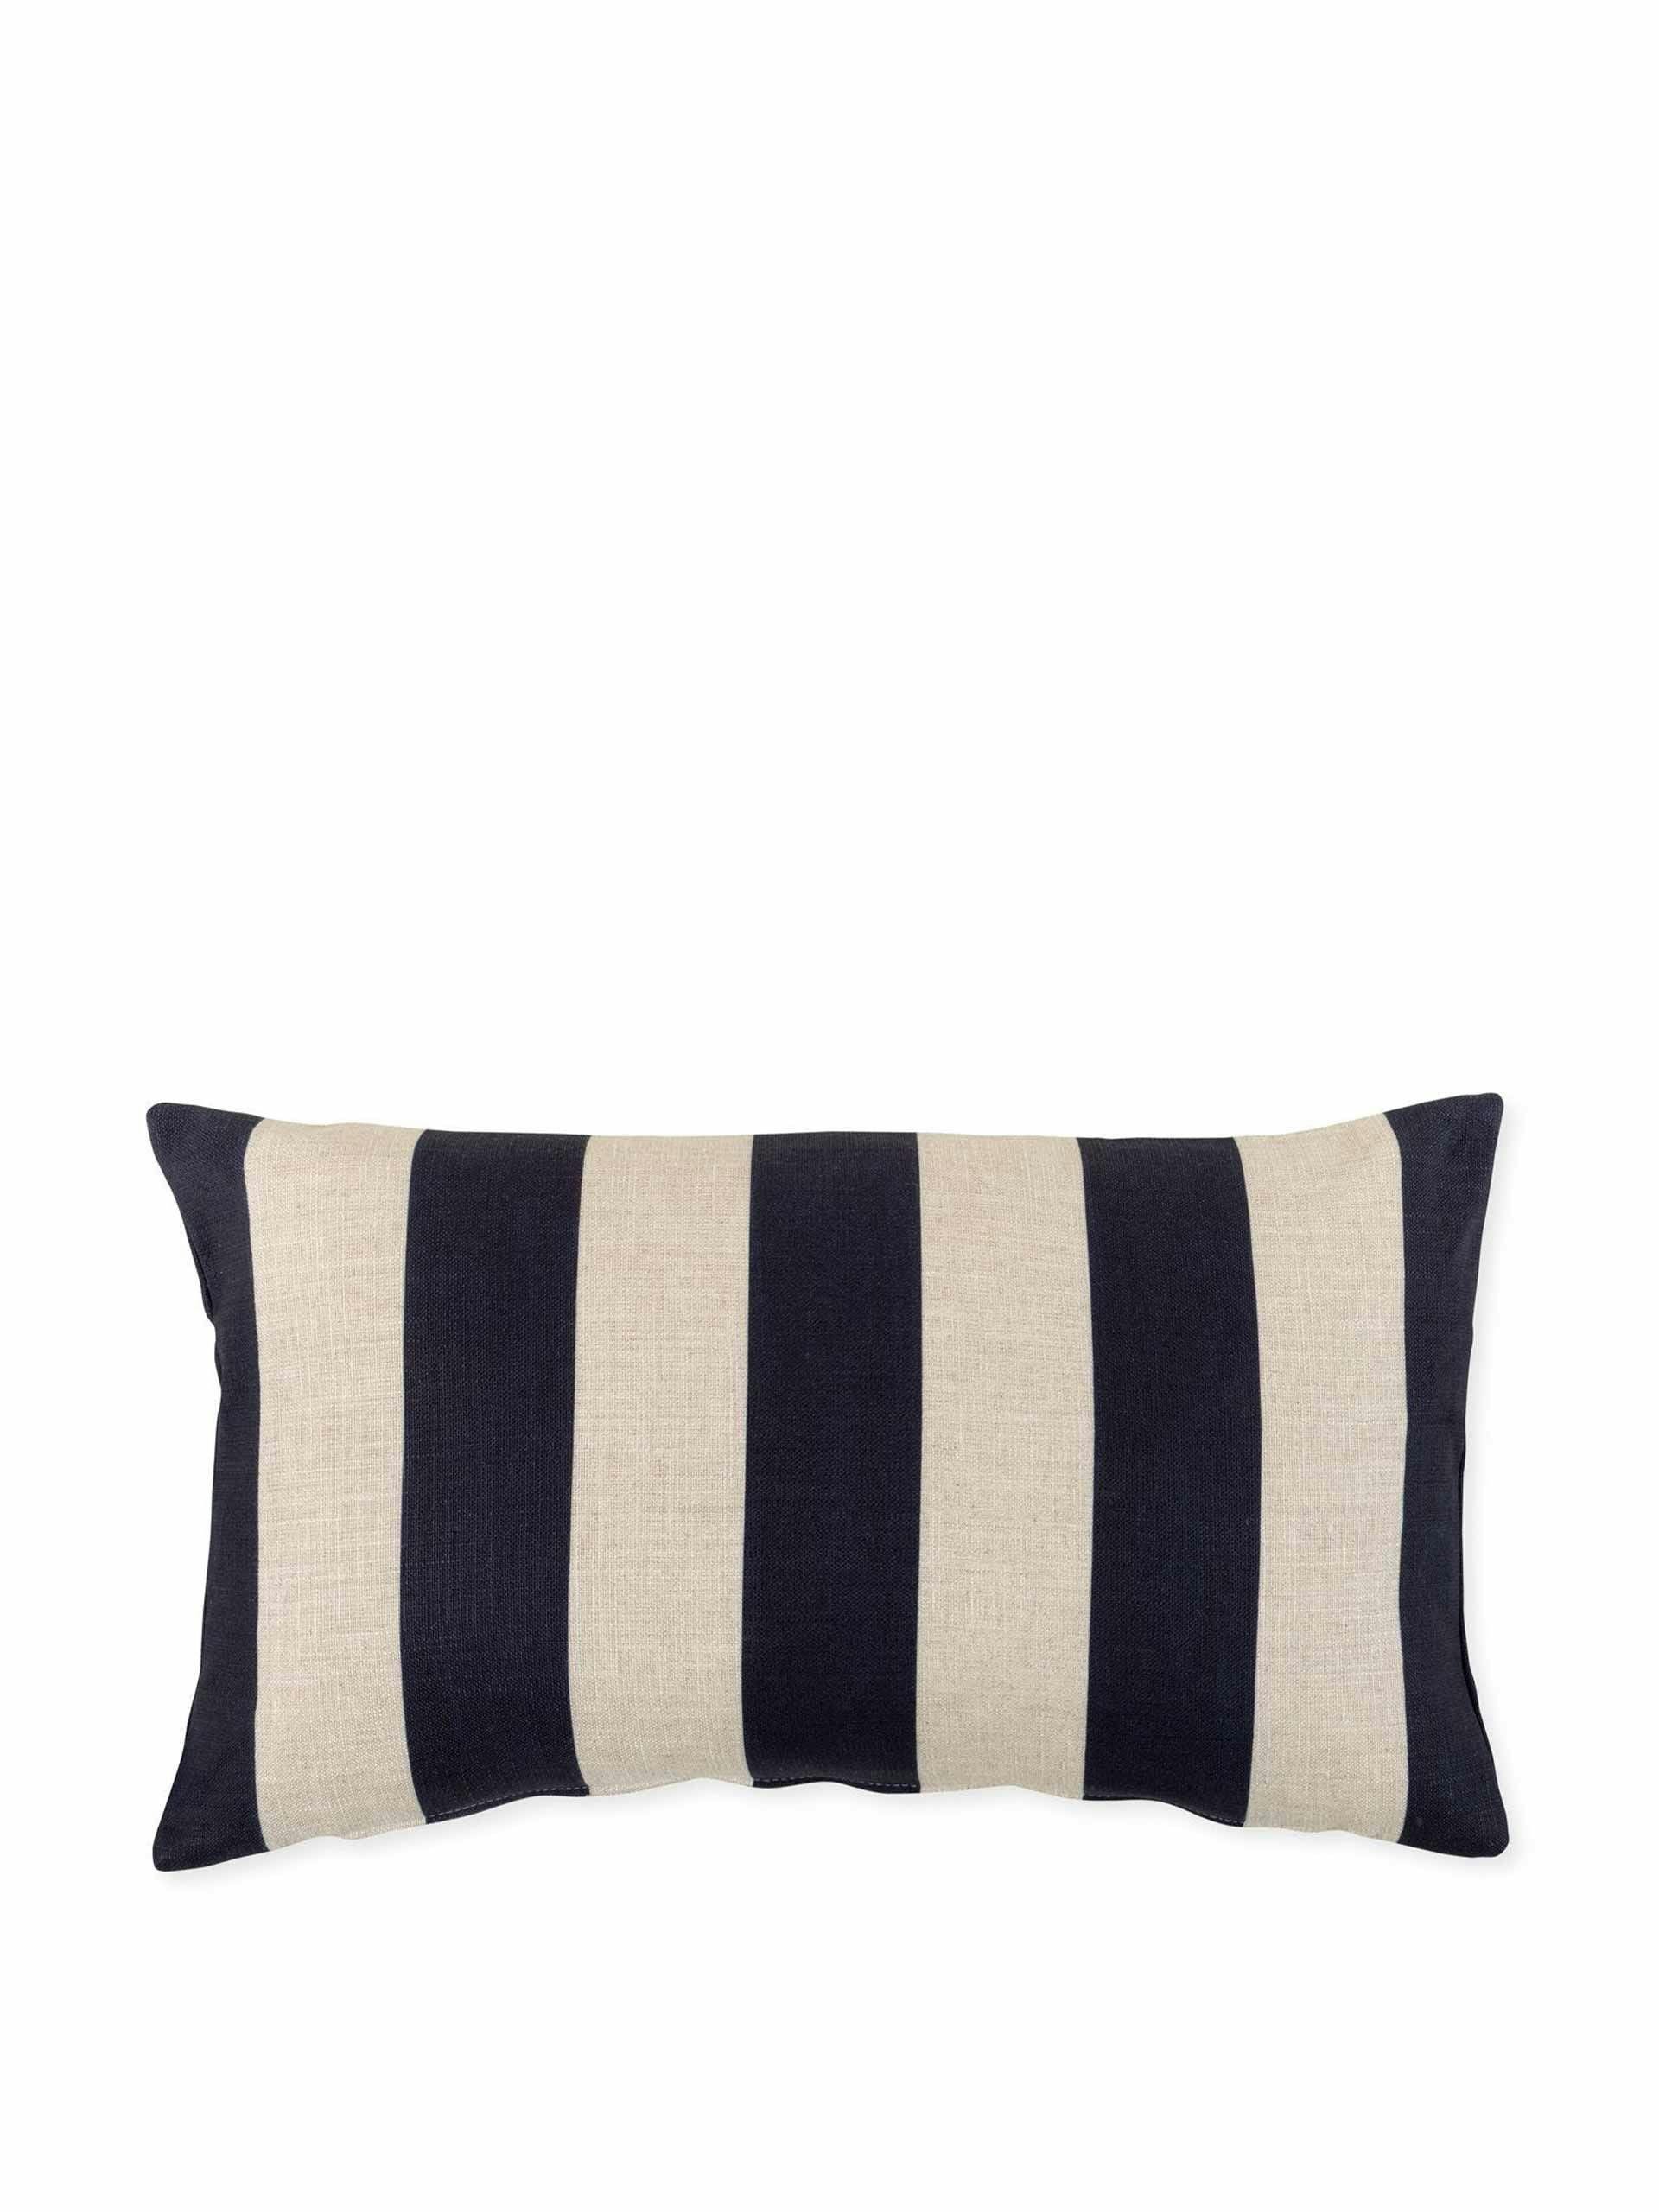 Navy and white striped cushion